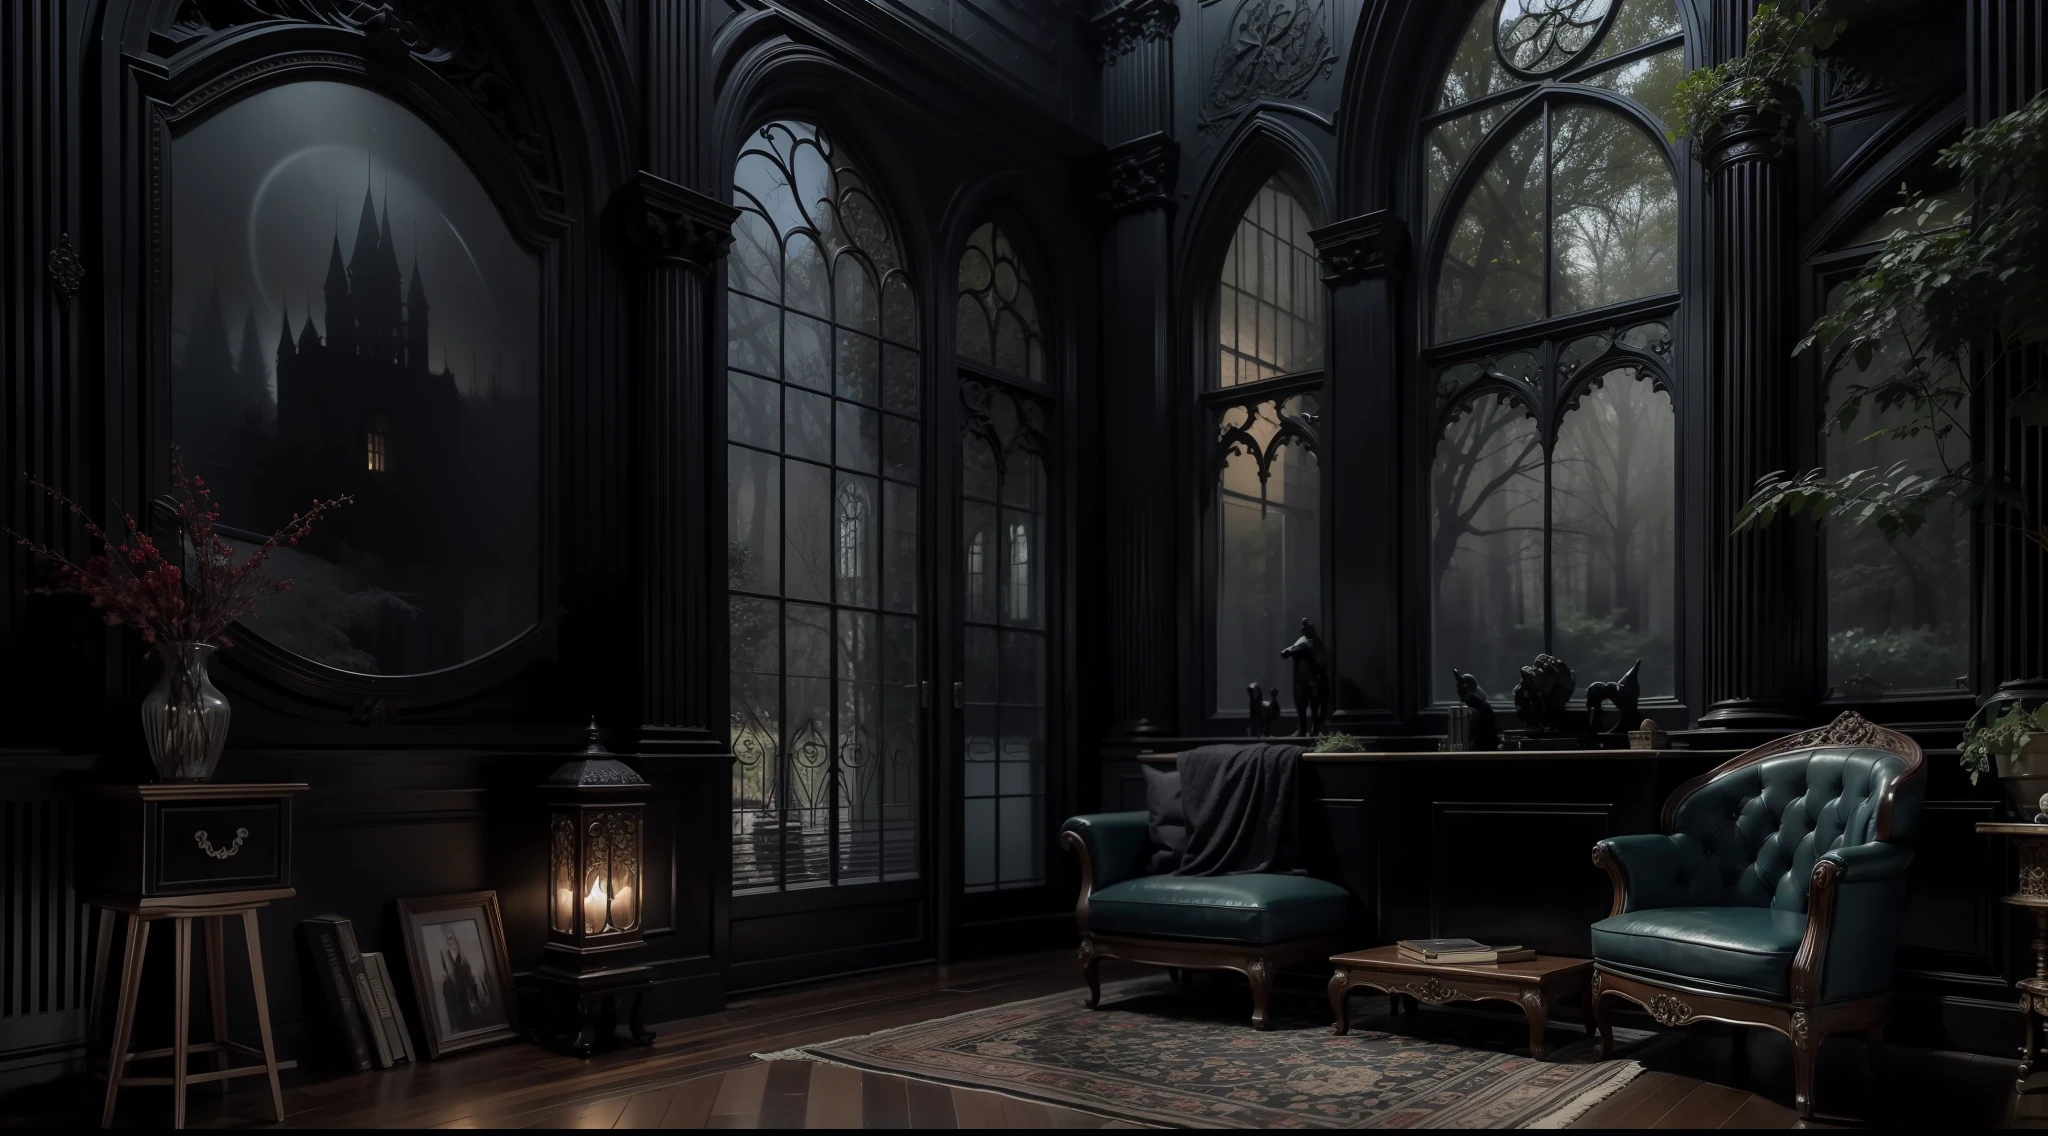 a dark night、Western-style living room deep in a dark and mysterious forest、relax、 interior architecture, Gothic art, Verism, One-person viewpoint, From the outside, canon, Super Detail, High quality, hight resolution, 8K, Best Quality